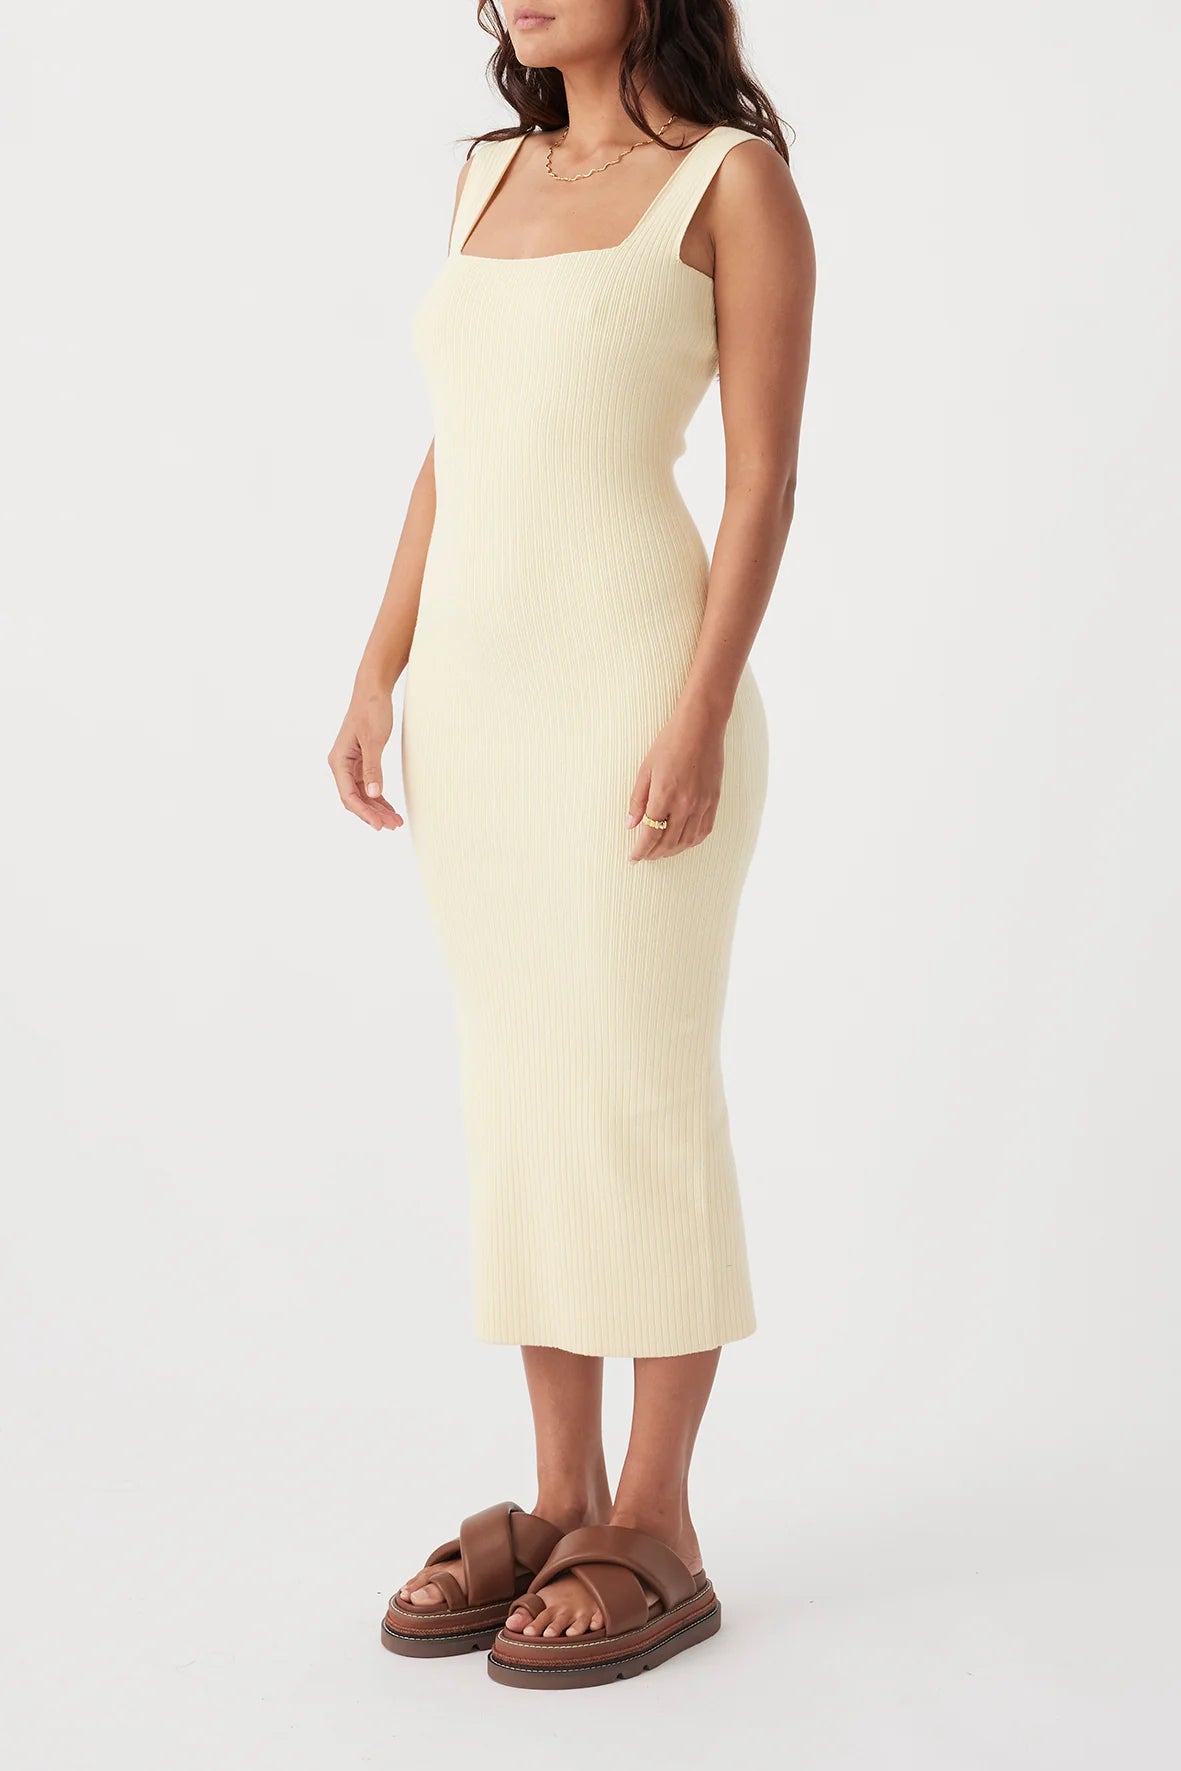 Tully Dress | Butter